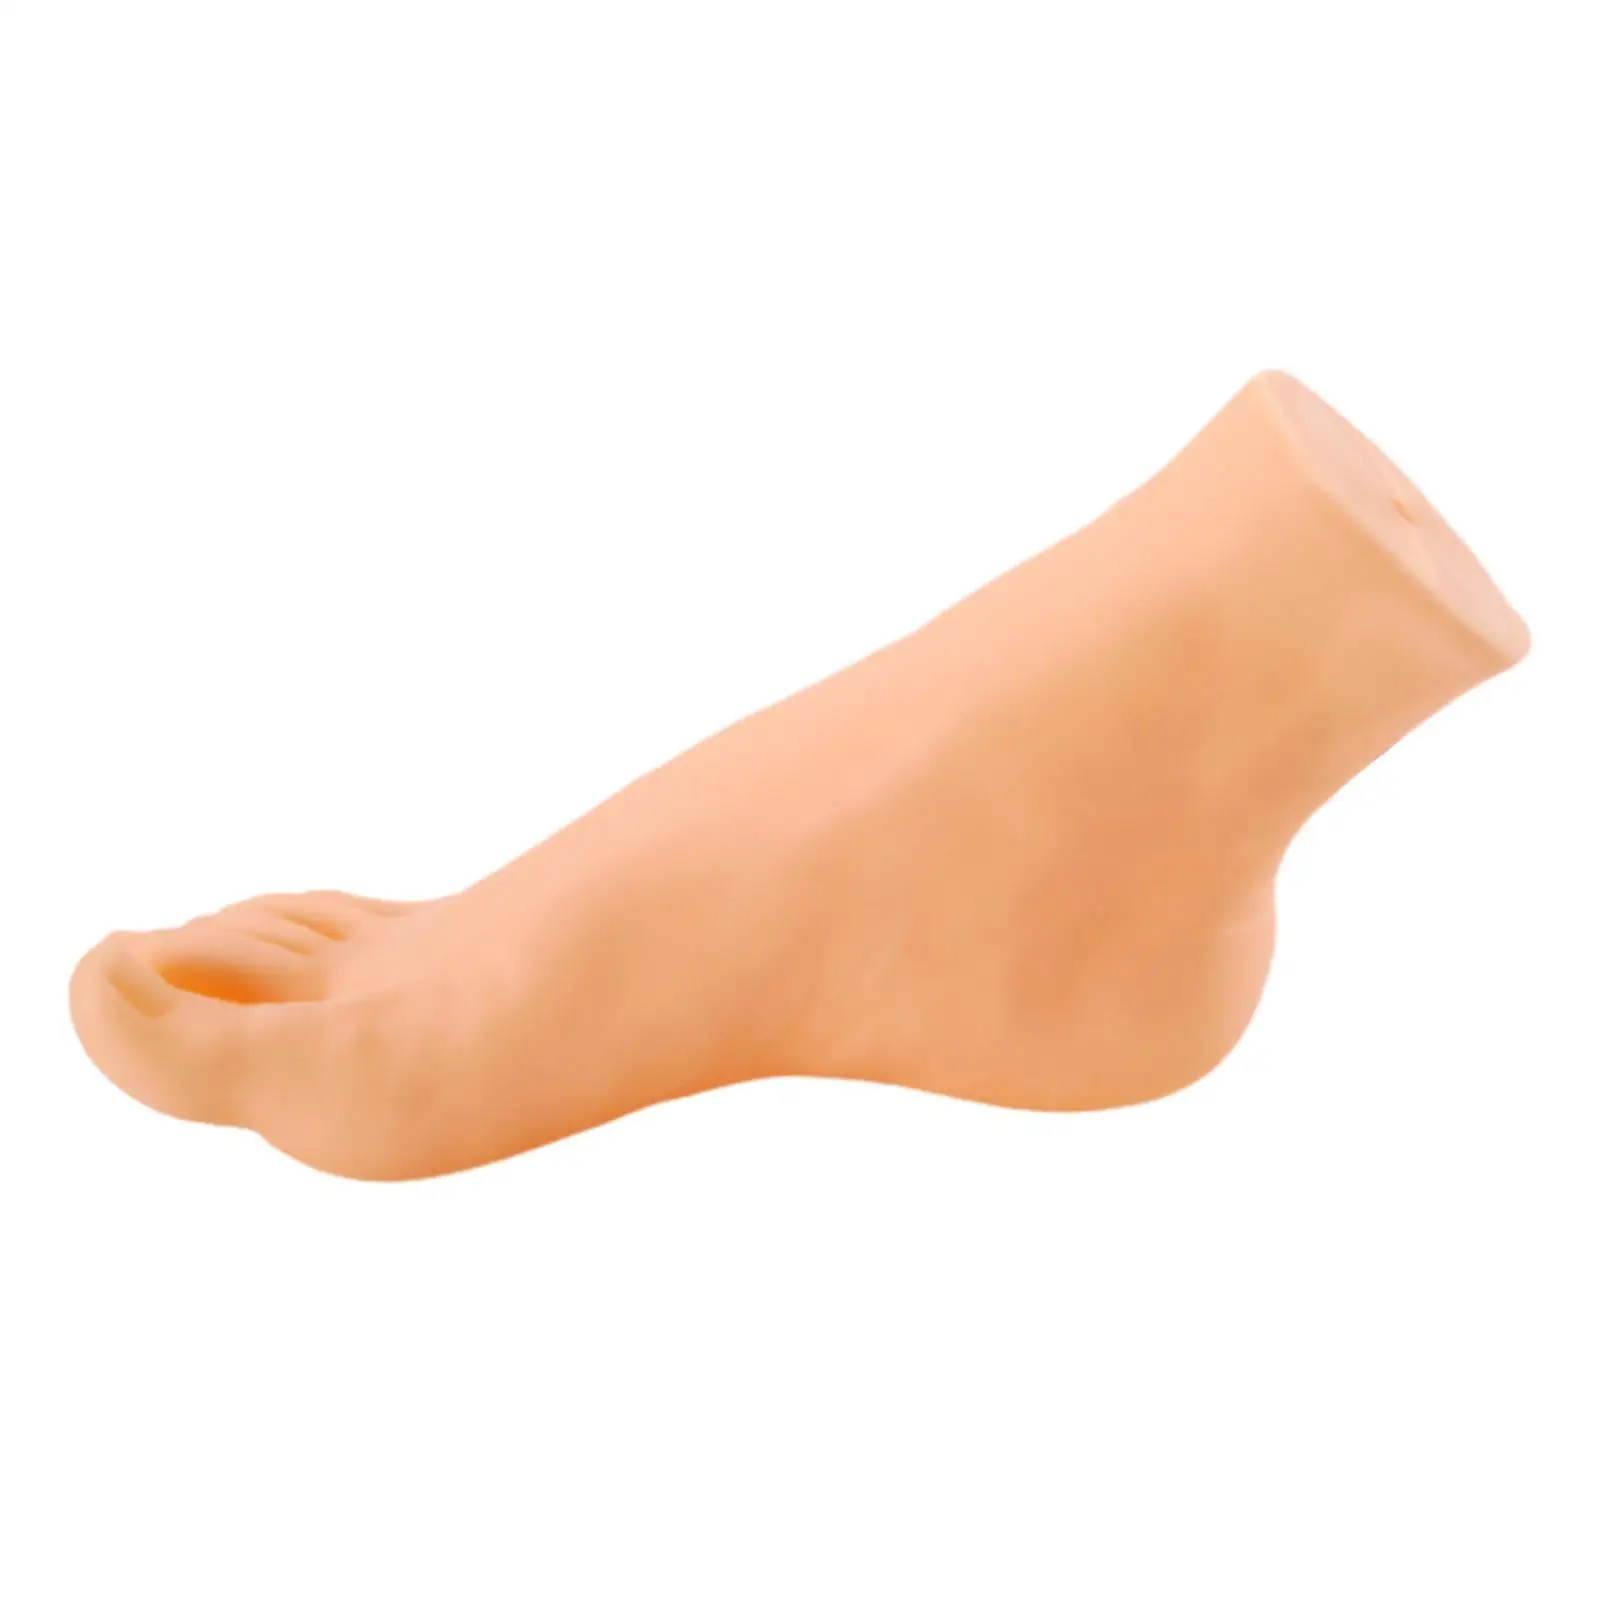 Mannequin Foot Display Durable Lightweight Foot Model Stand Tools Simulation for Home Shop Display Ankle Bracelet Short Stocking